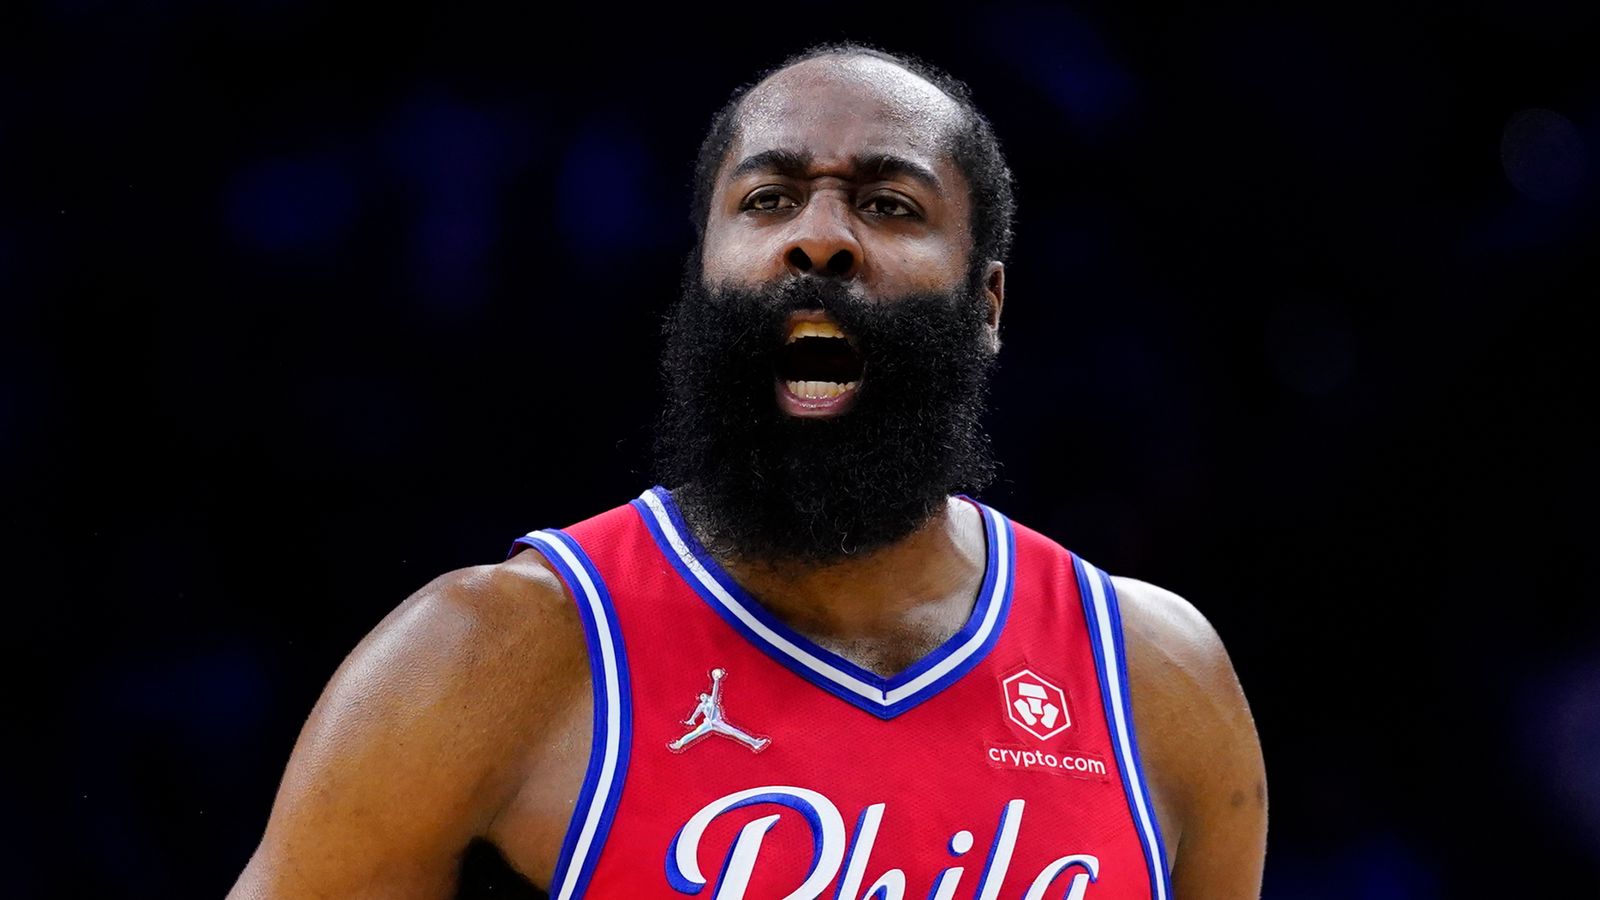 James Harden's relationship with Philadelphia 76ers is reportedly beyond repair after he called President of Basketball Operations - Daryl Morey - a "liar"